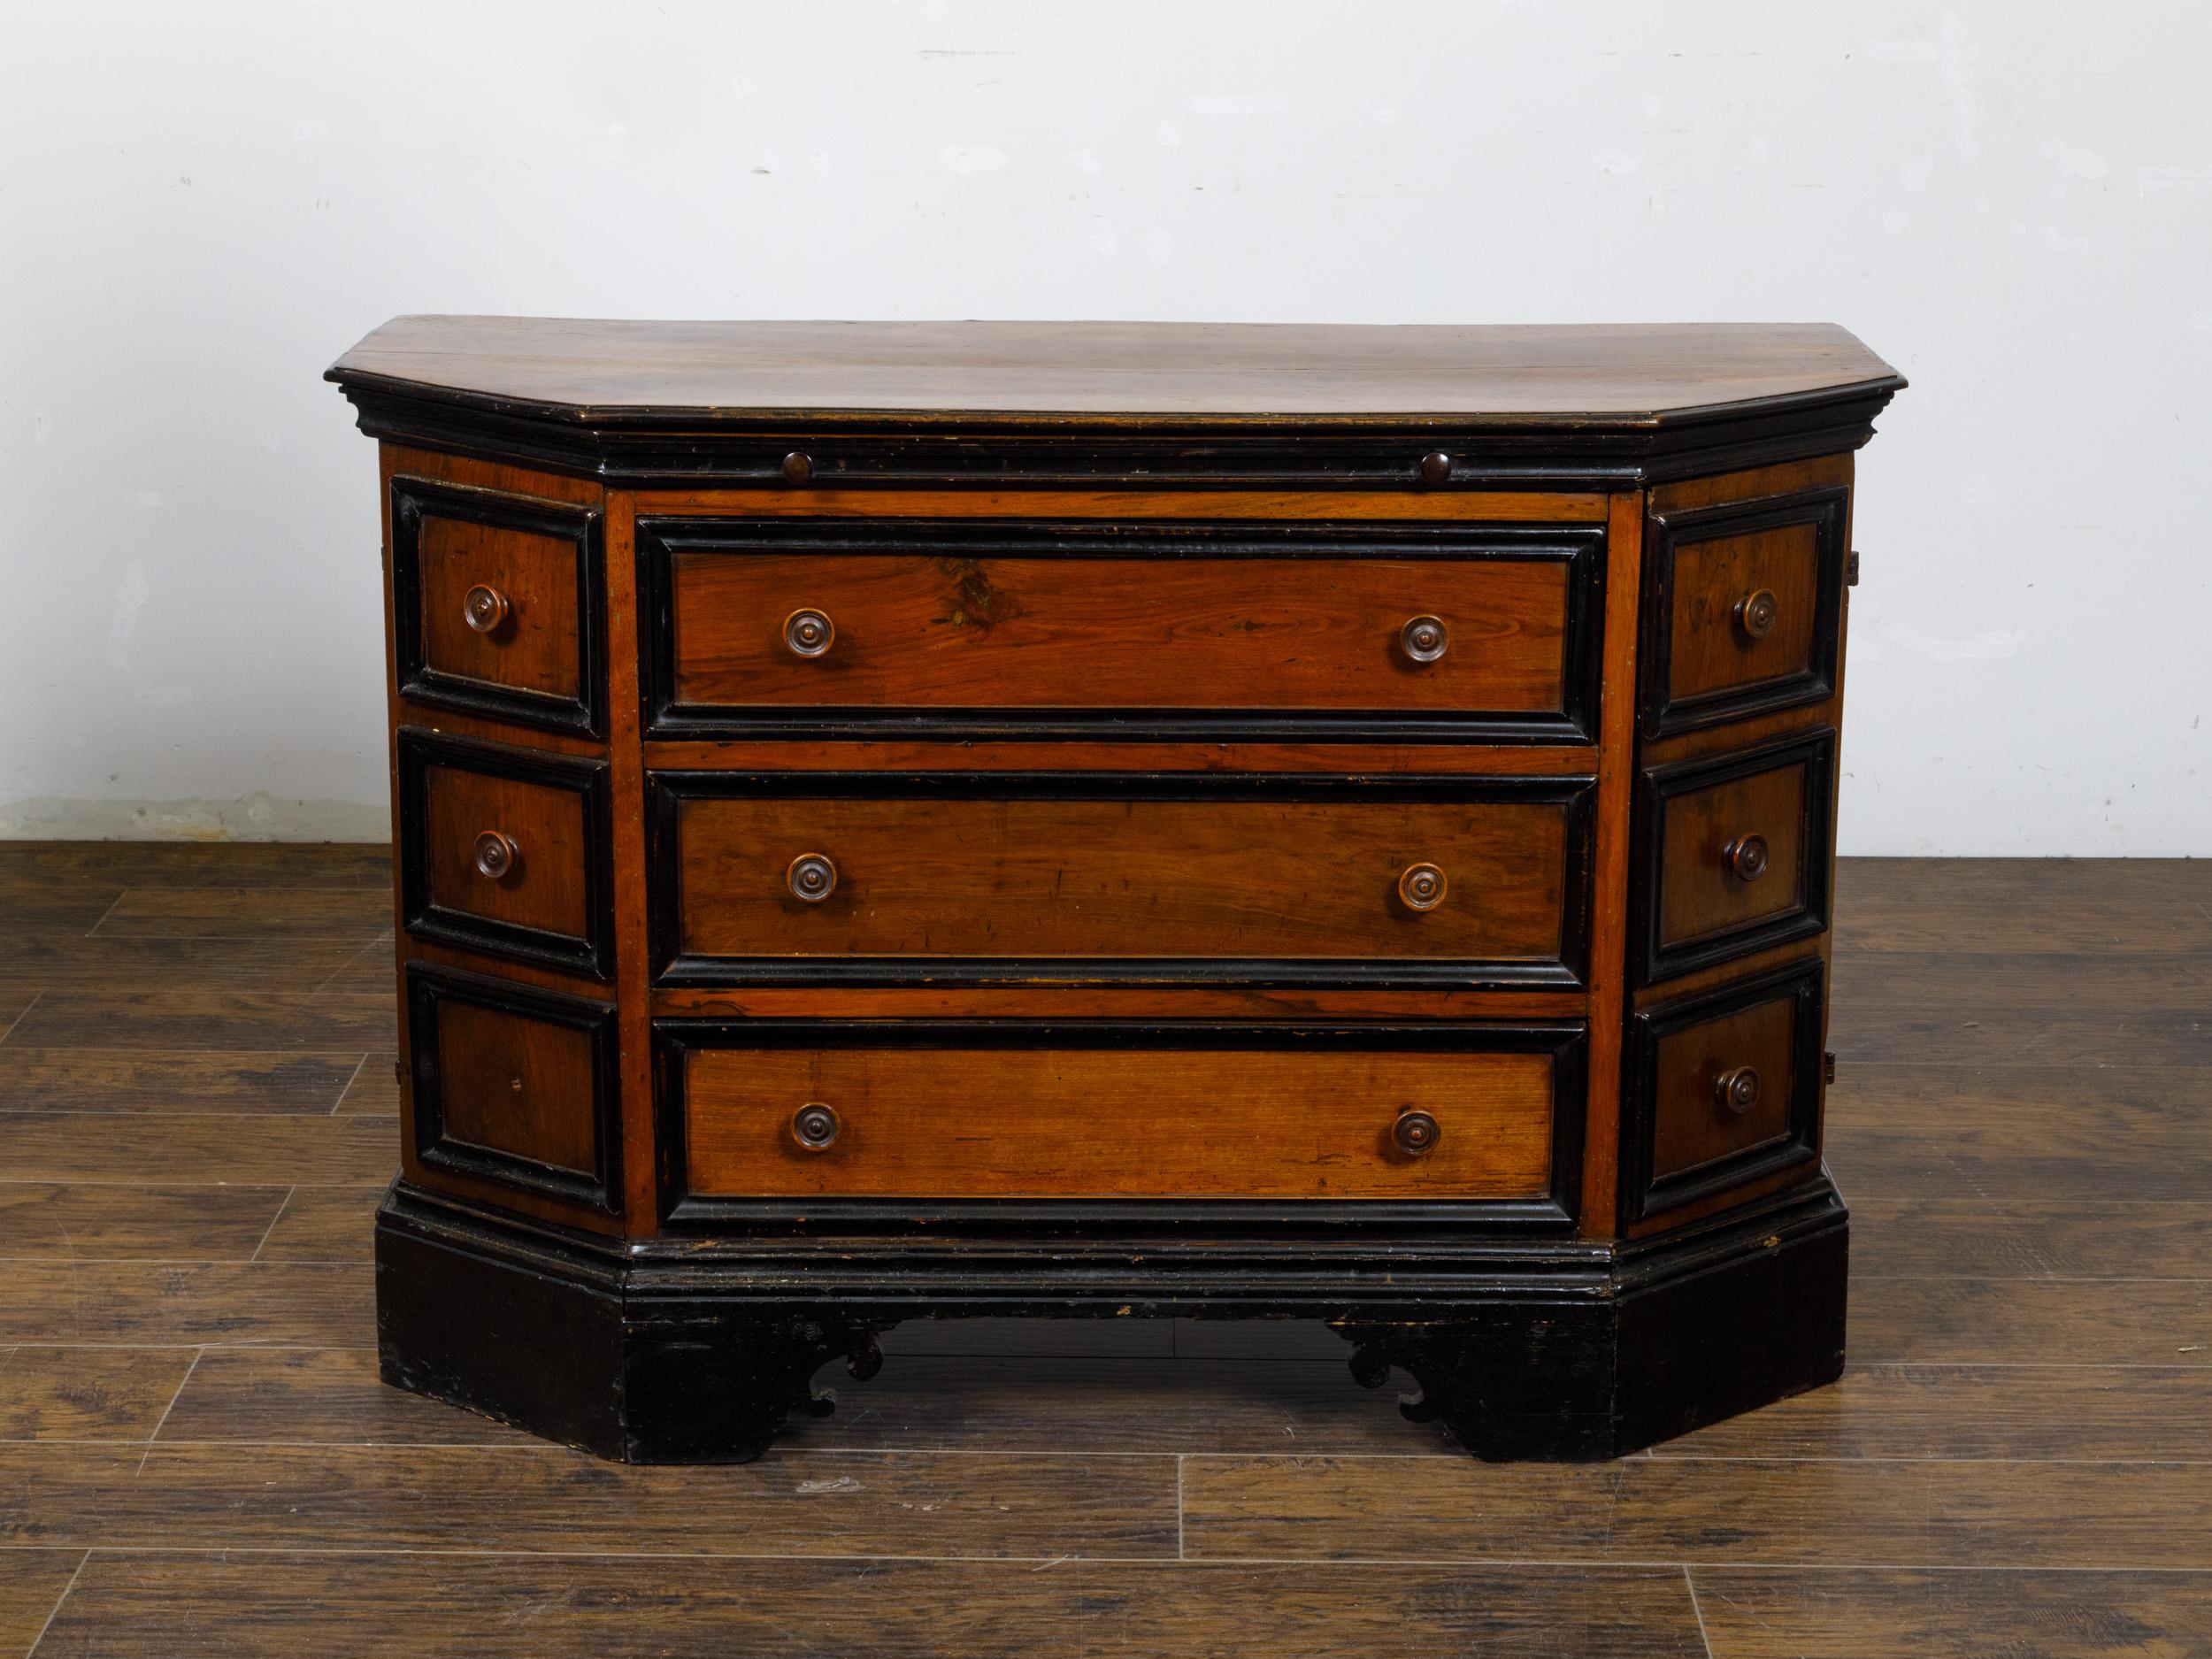 A French two-toned walnut dresser from the 19th century with canted sides, three drawers, two doors and ebonized accents. This French two-toned walnut dresser from the 19th century elegantly combines functionality with ornate design, making it a